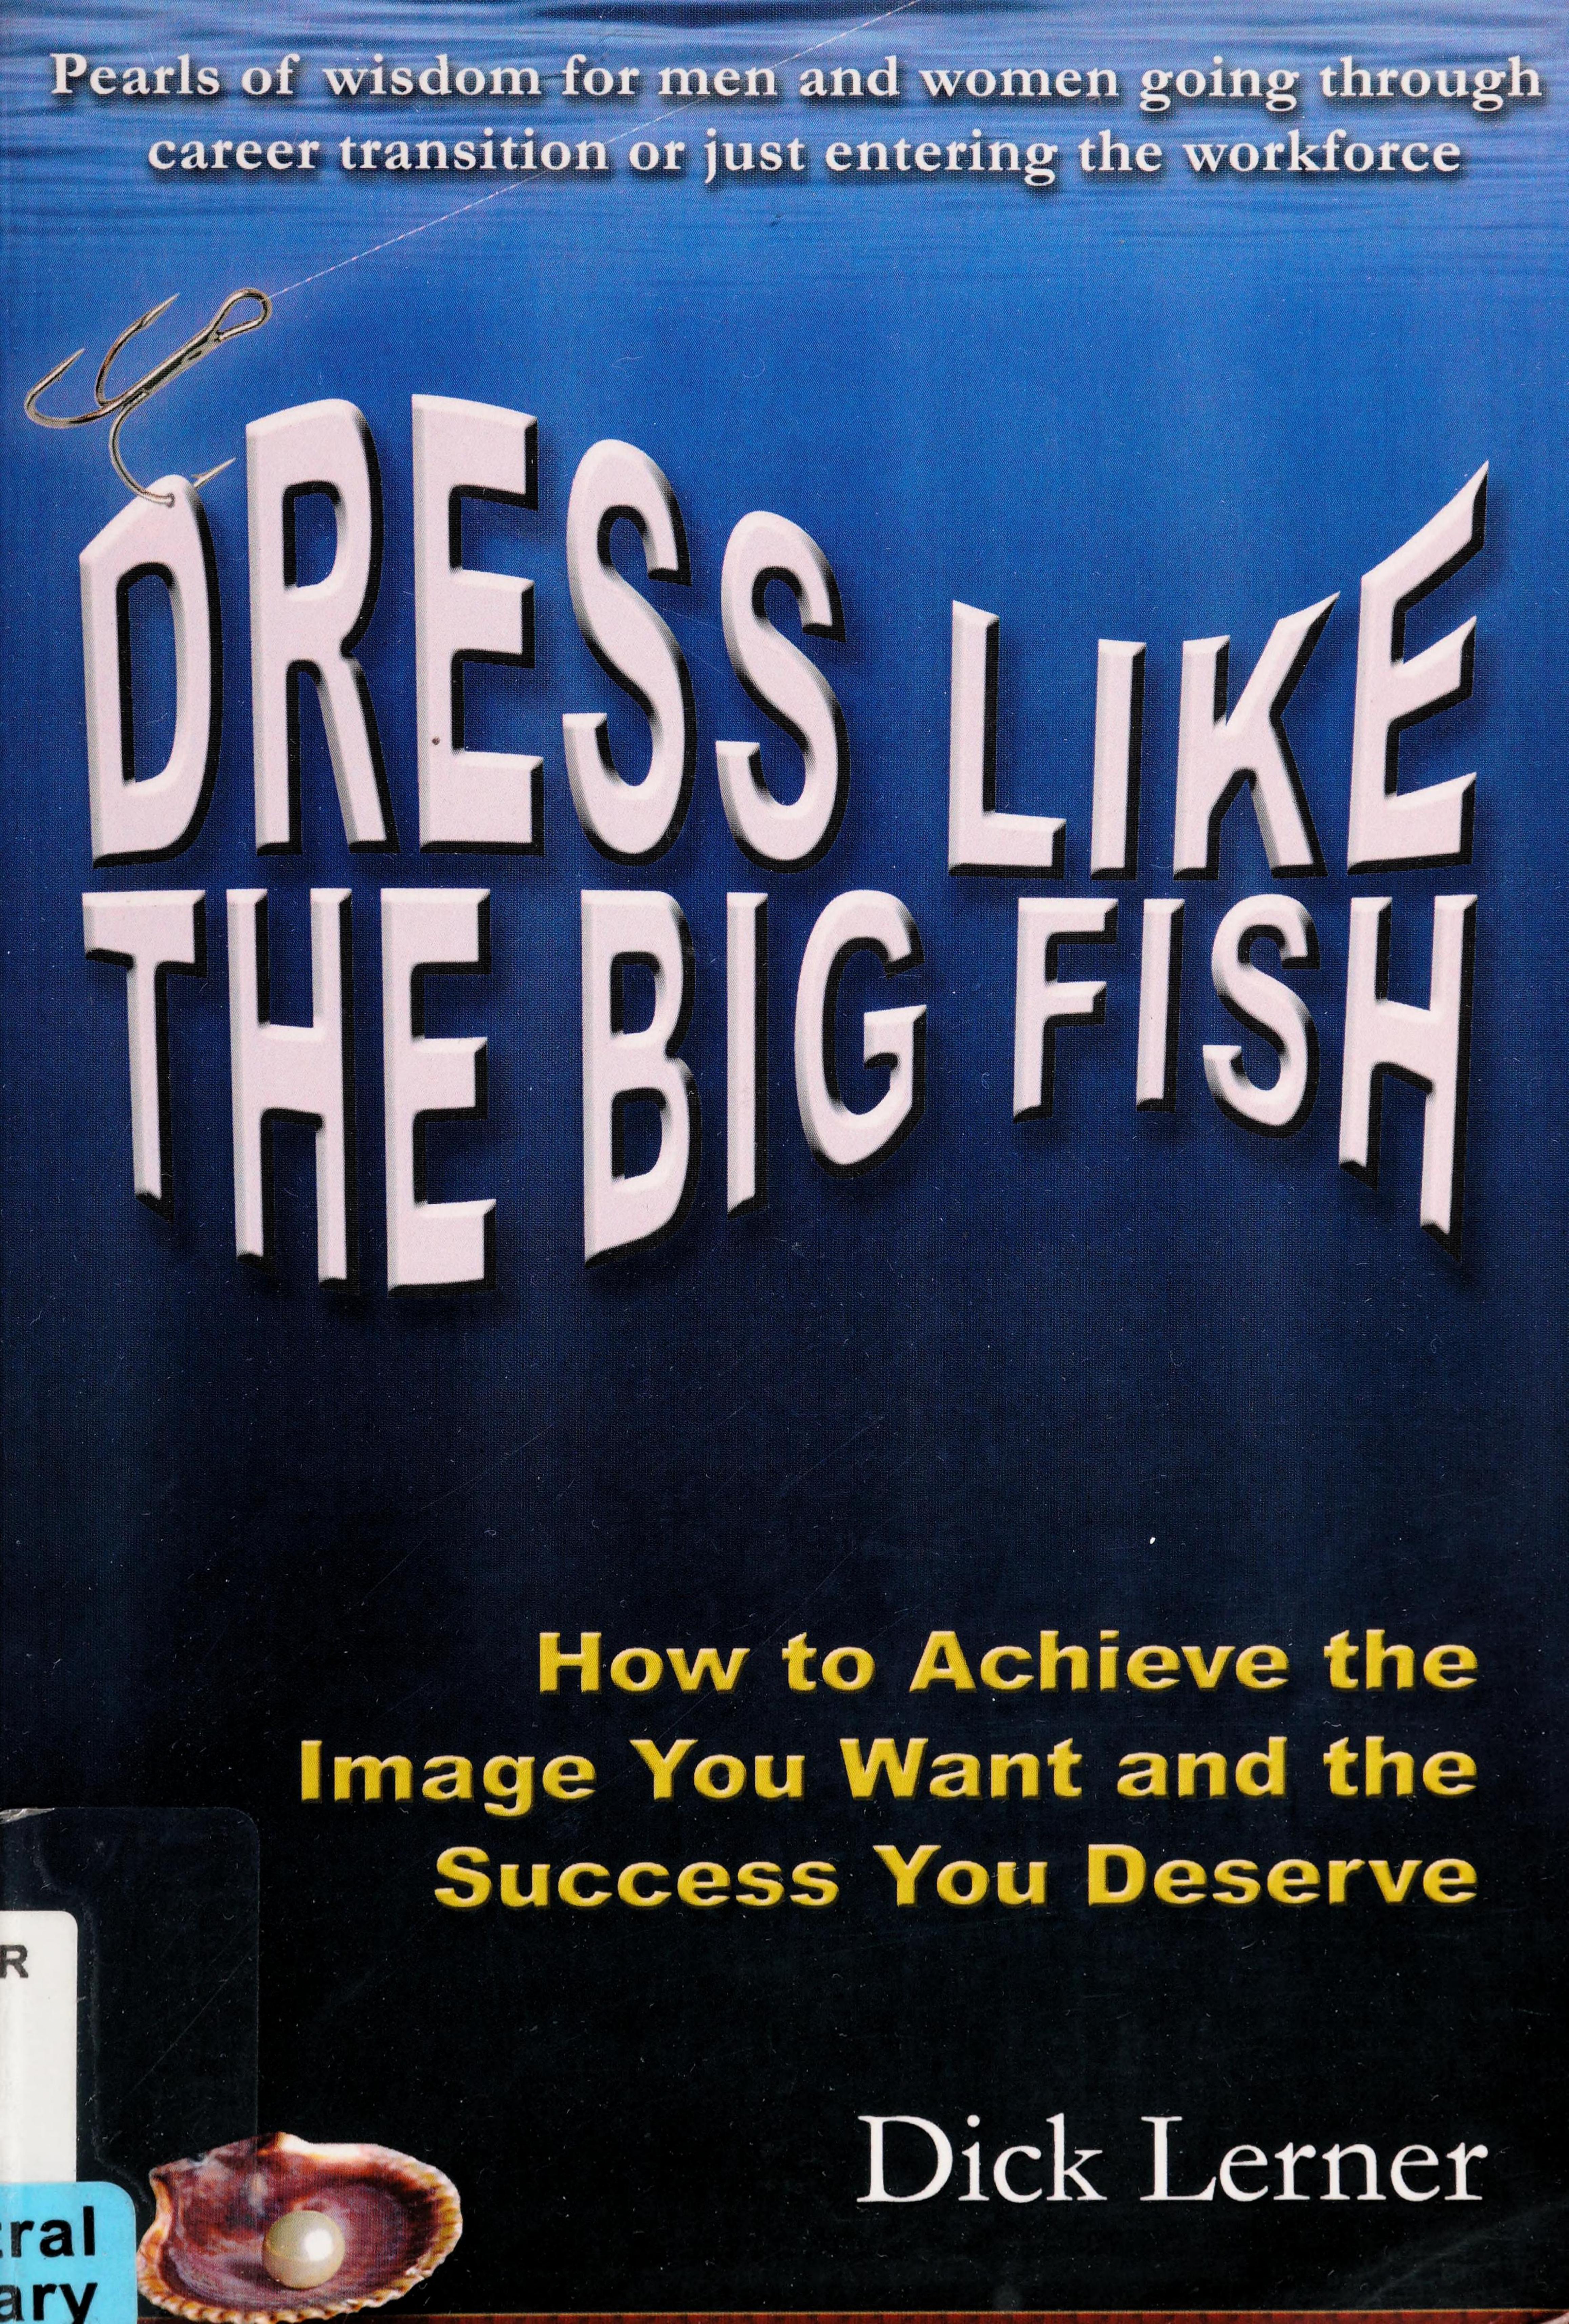 Dress Like the Big Fish: How to Achieve the Image You Want and the Success You Deserve by Dick Lerner